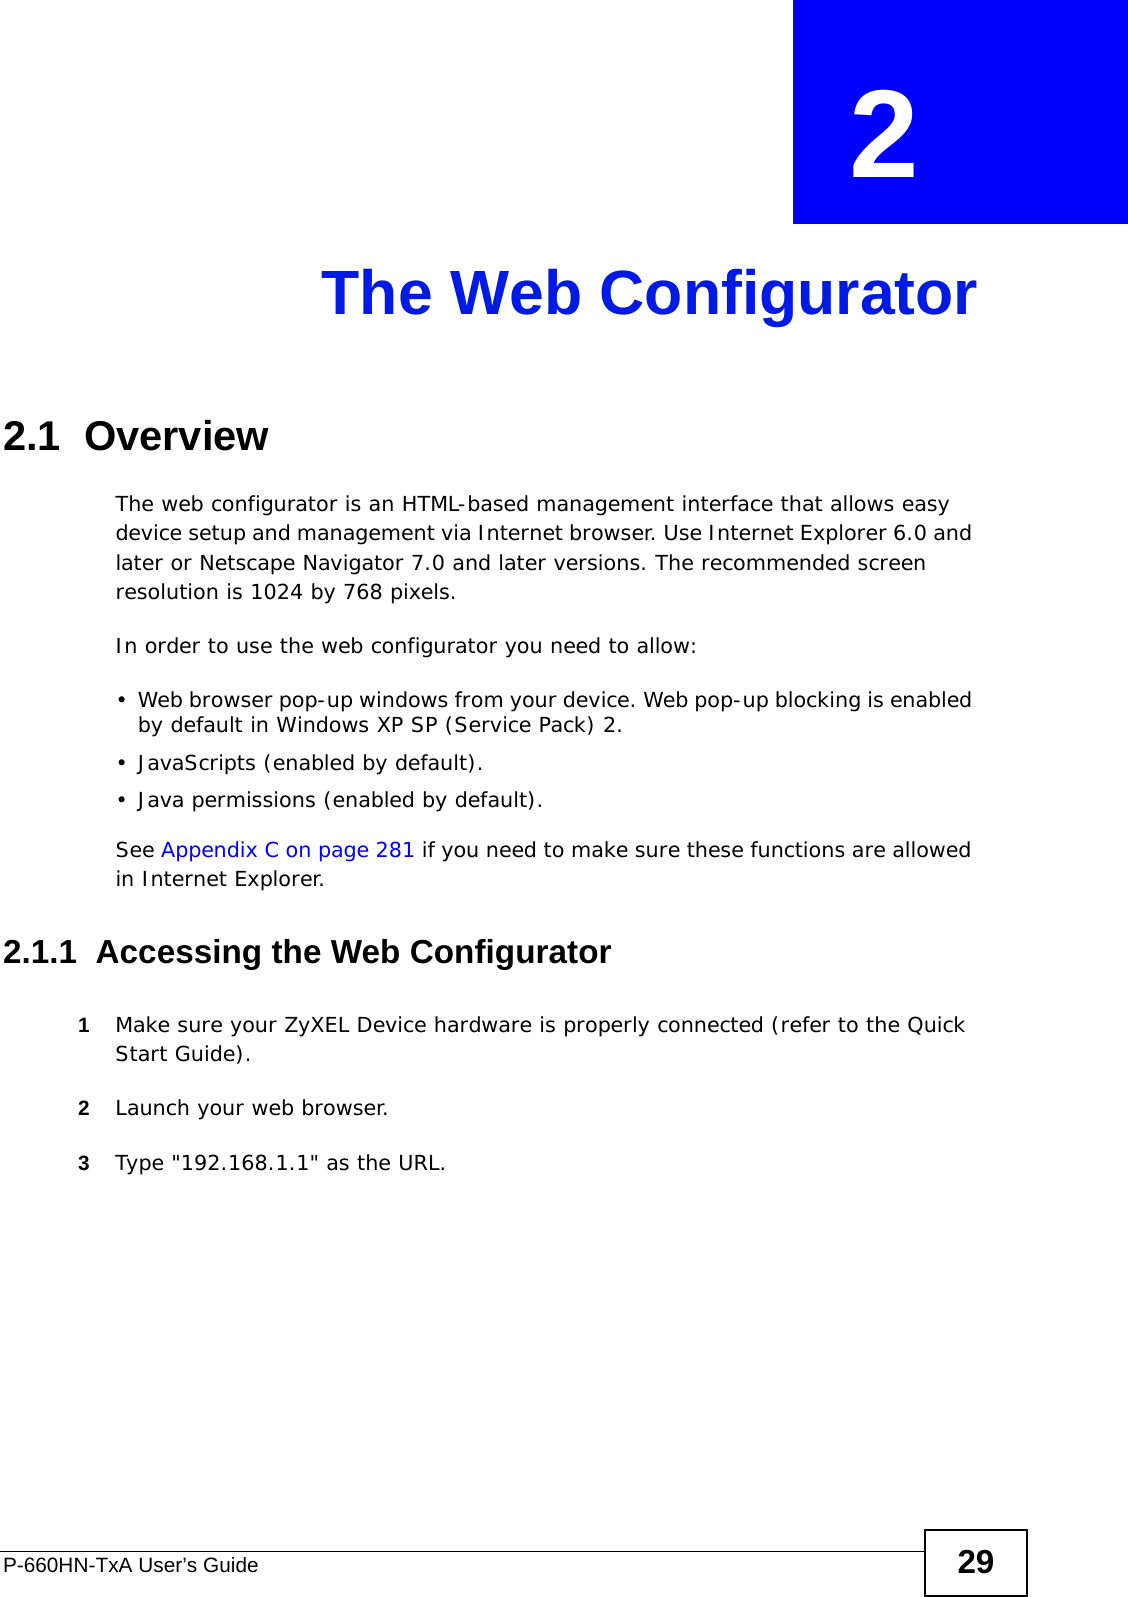 P-660HN-TxA User’s Guide 29CHAPTER  2 The Web Configurator2.1  OverviewThe web configurator is an HTML-based management interface that allows easy device setup and management via Internet browser. Use Internet Explorer 6.0 and later or Netscape Navigator 7.0 and later versions. The recommended screen resolution is 1024 by 768 pixels.In order to use the web configurator you need to allow:• Web browser pop-up windows from your device. Web pop-up blocking is enabled by default in Windows XP SP (Service Pack) 2.• JavaScripts (enabled by default).• Java permissions (enabled by default).See Appendix C on page 281 if you need to make sure these functions are allowed in Internet Explorer.2.1.1  Accessing the Web Configurator1Make sure your ZyXEL Device hardware is properly connected (refer to the Quick Start Guide).2Launch your web browser.3Type &quot;192.168.1.1&quot; as the URL.